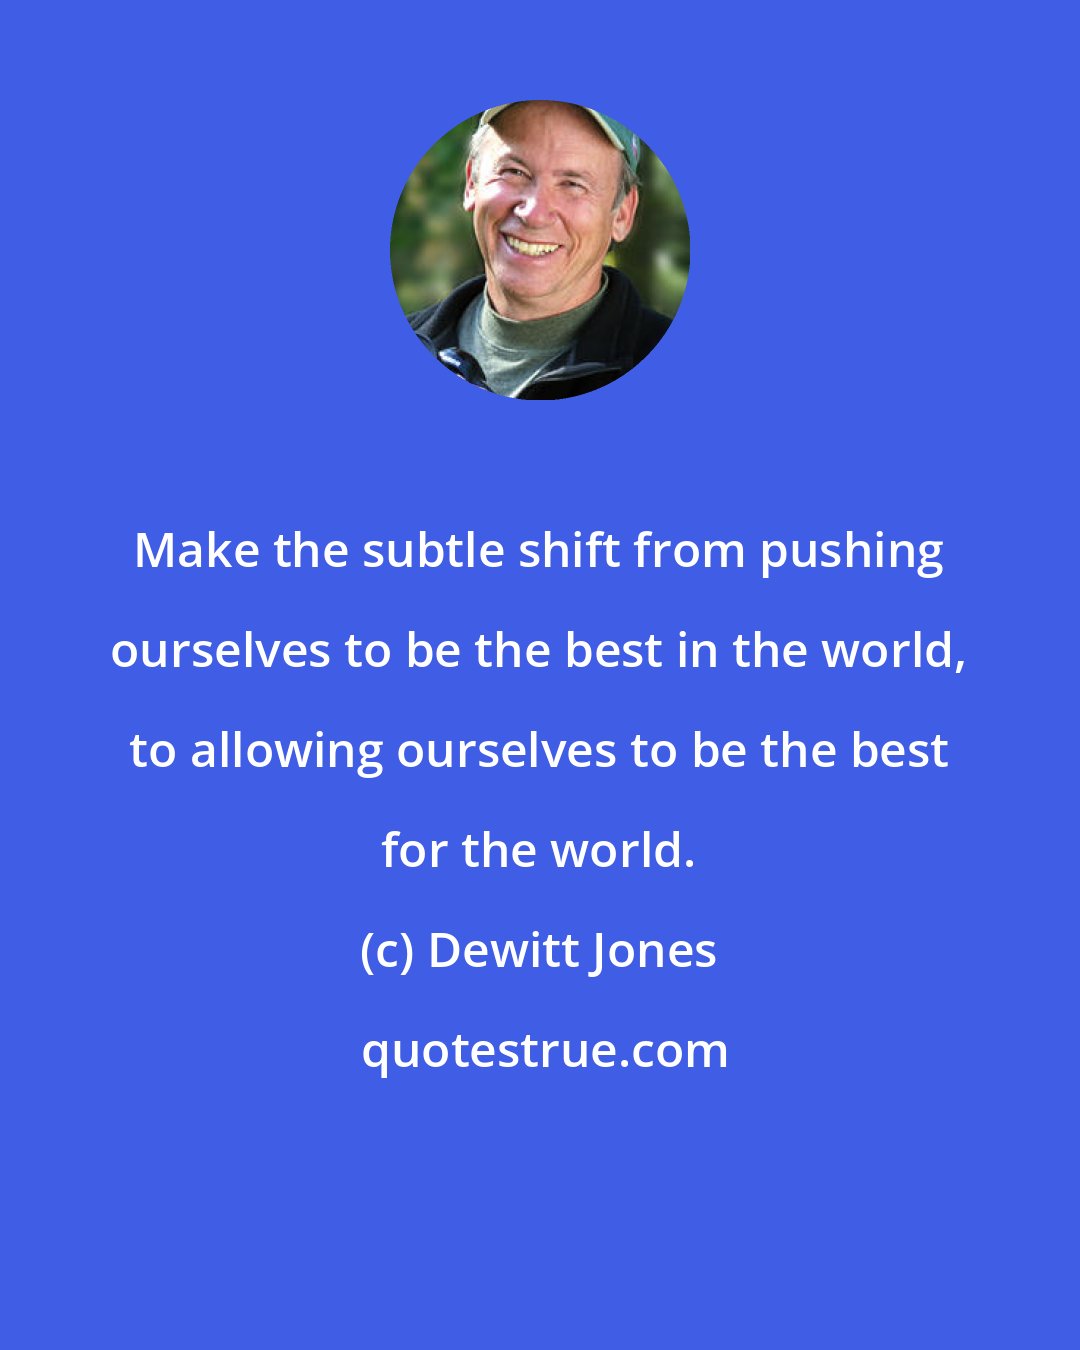 Dewitt Jones: Make the subtle shift from pushing ourselves to be the best in the world, to allowing ourselves to be the best for the world.